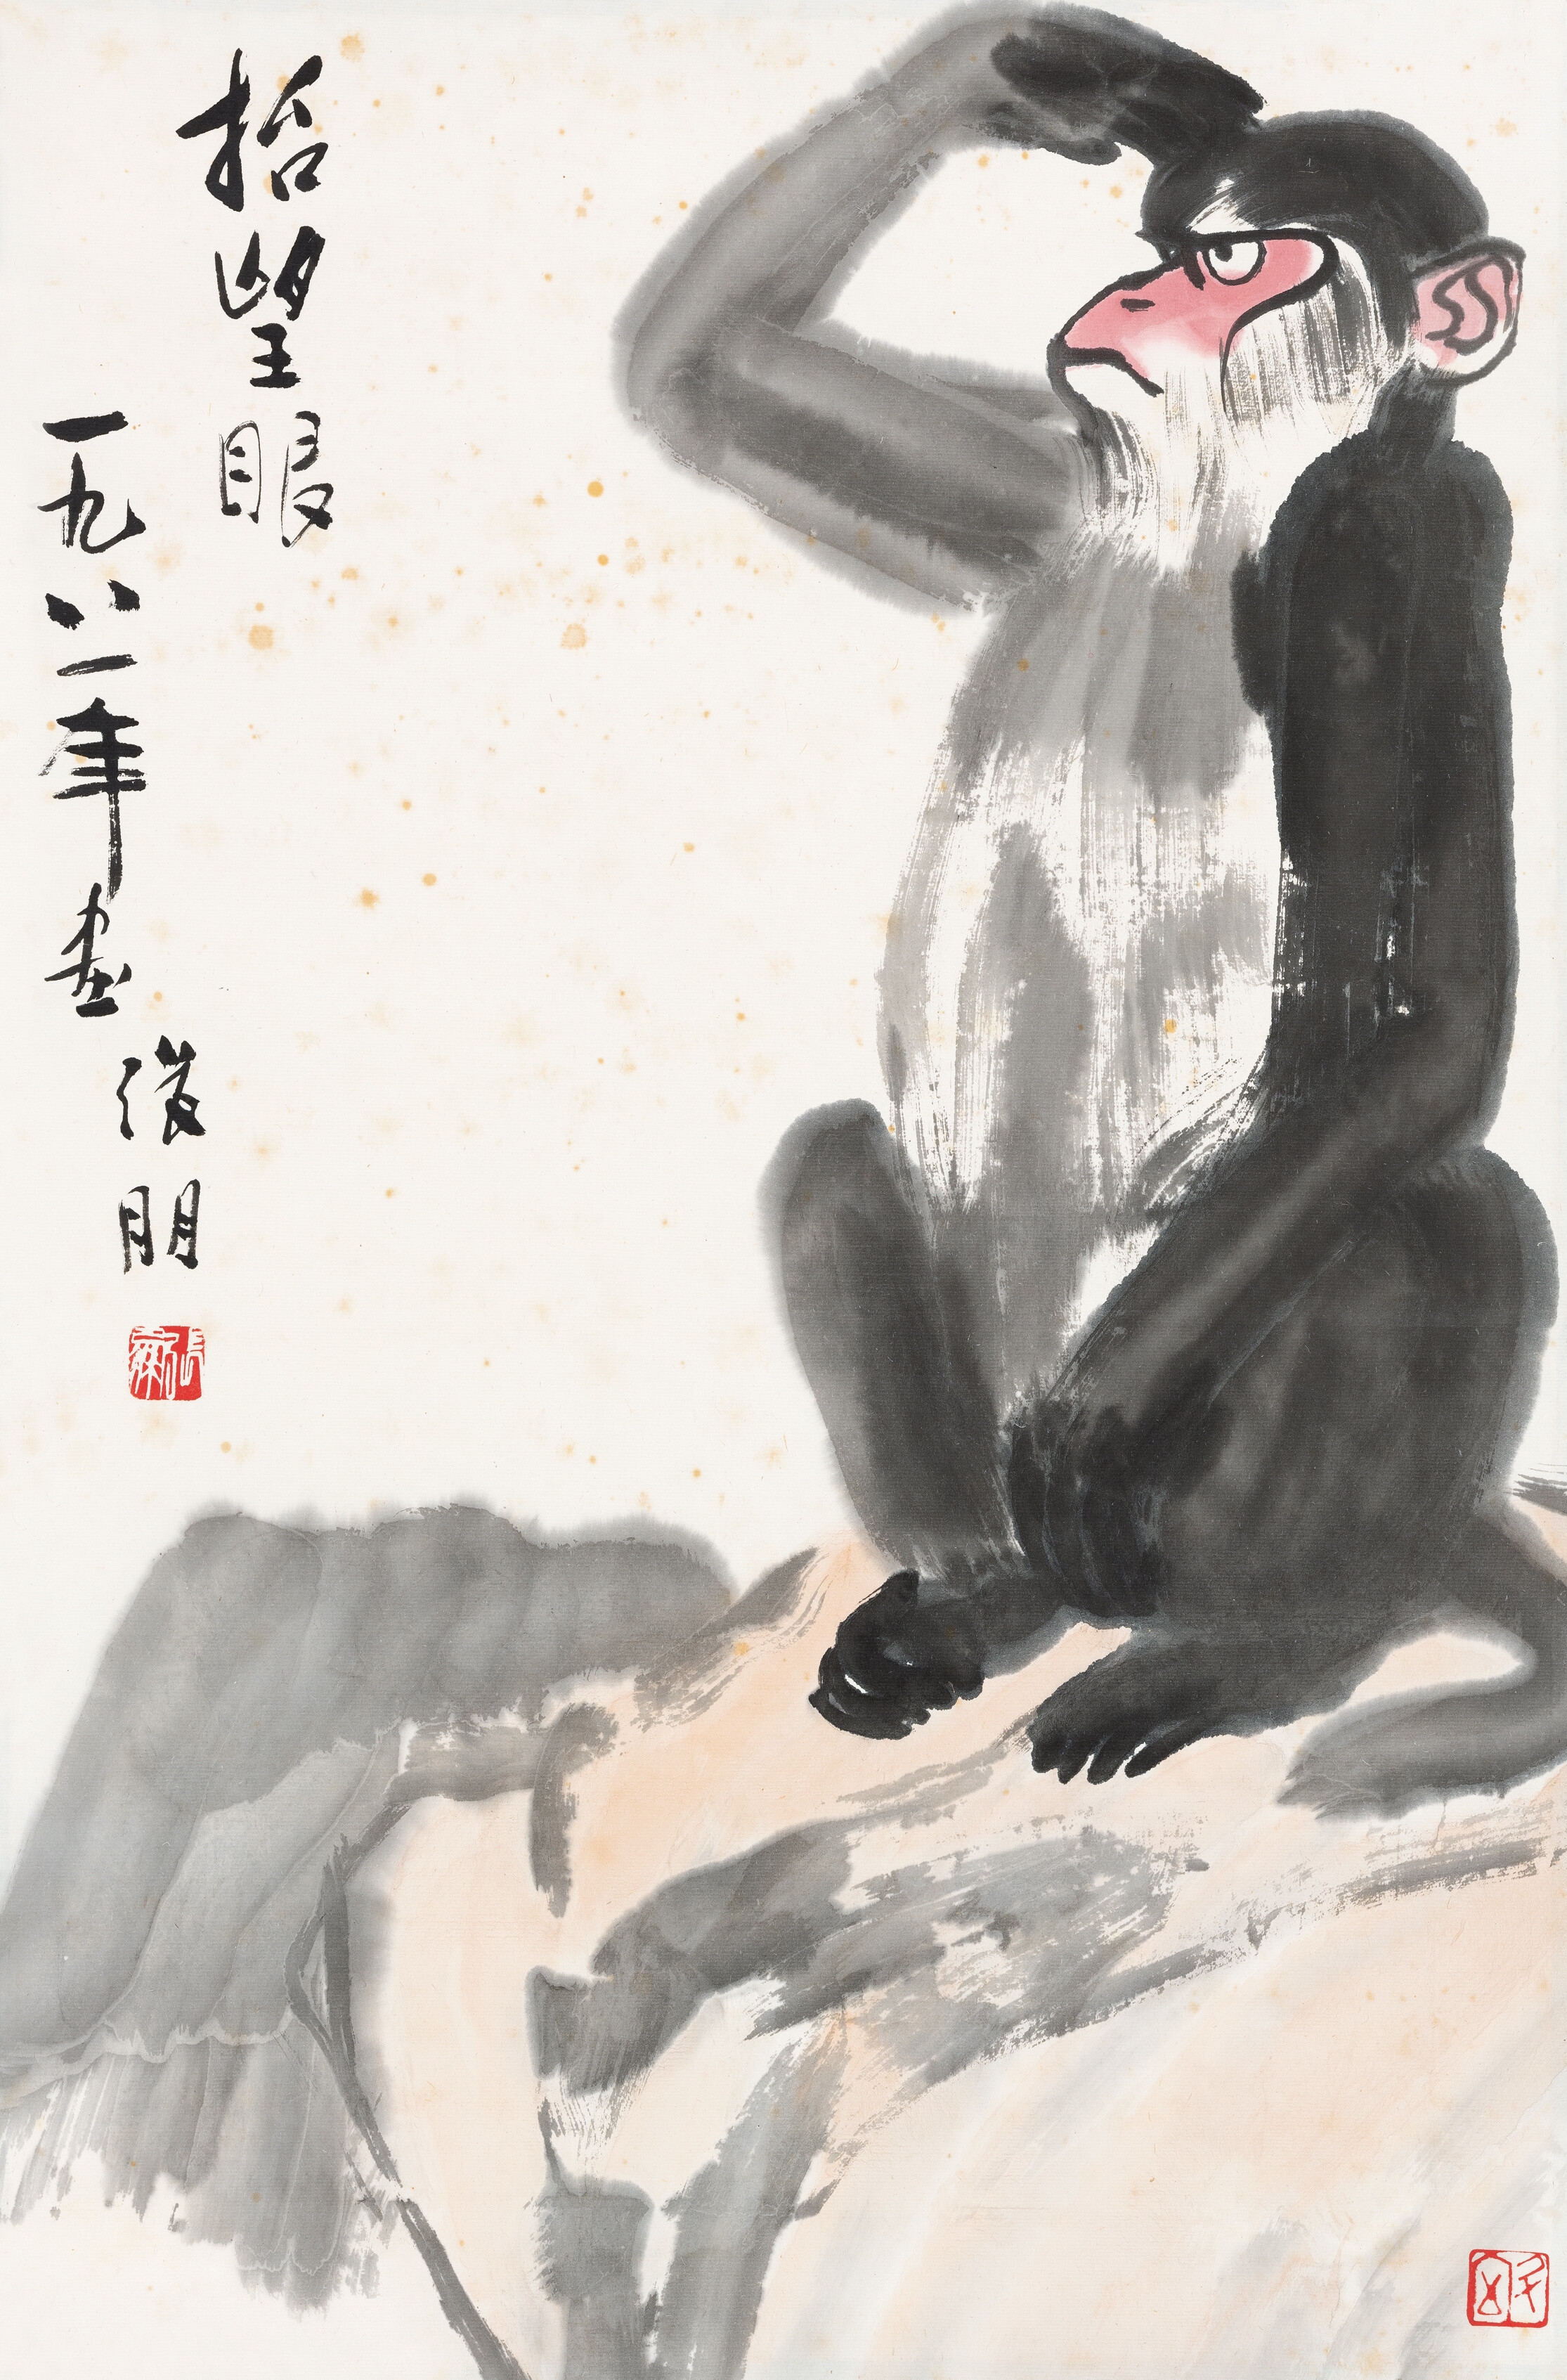 Look up by Zhang Peng, 1981